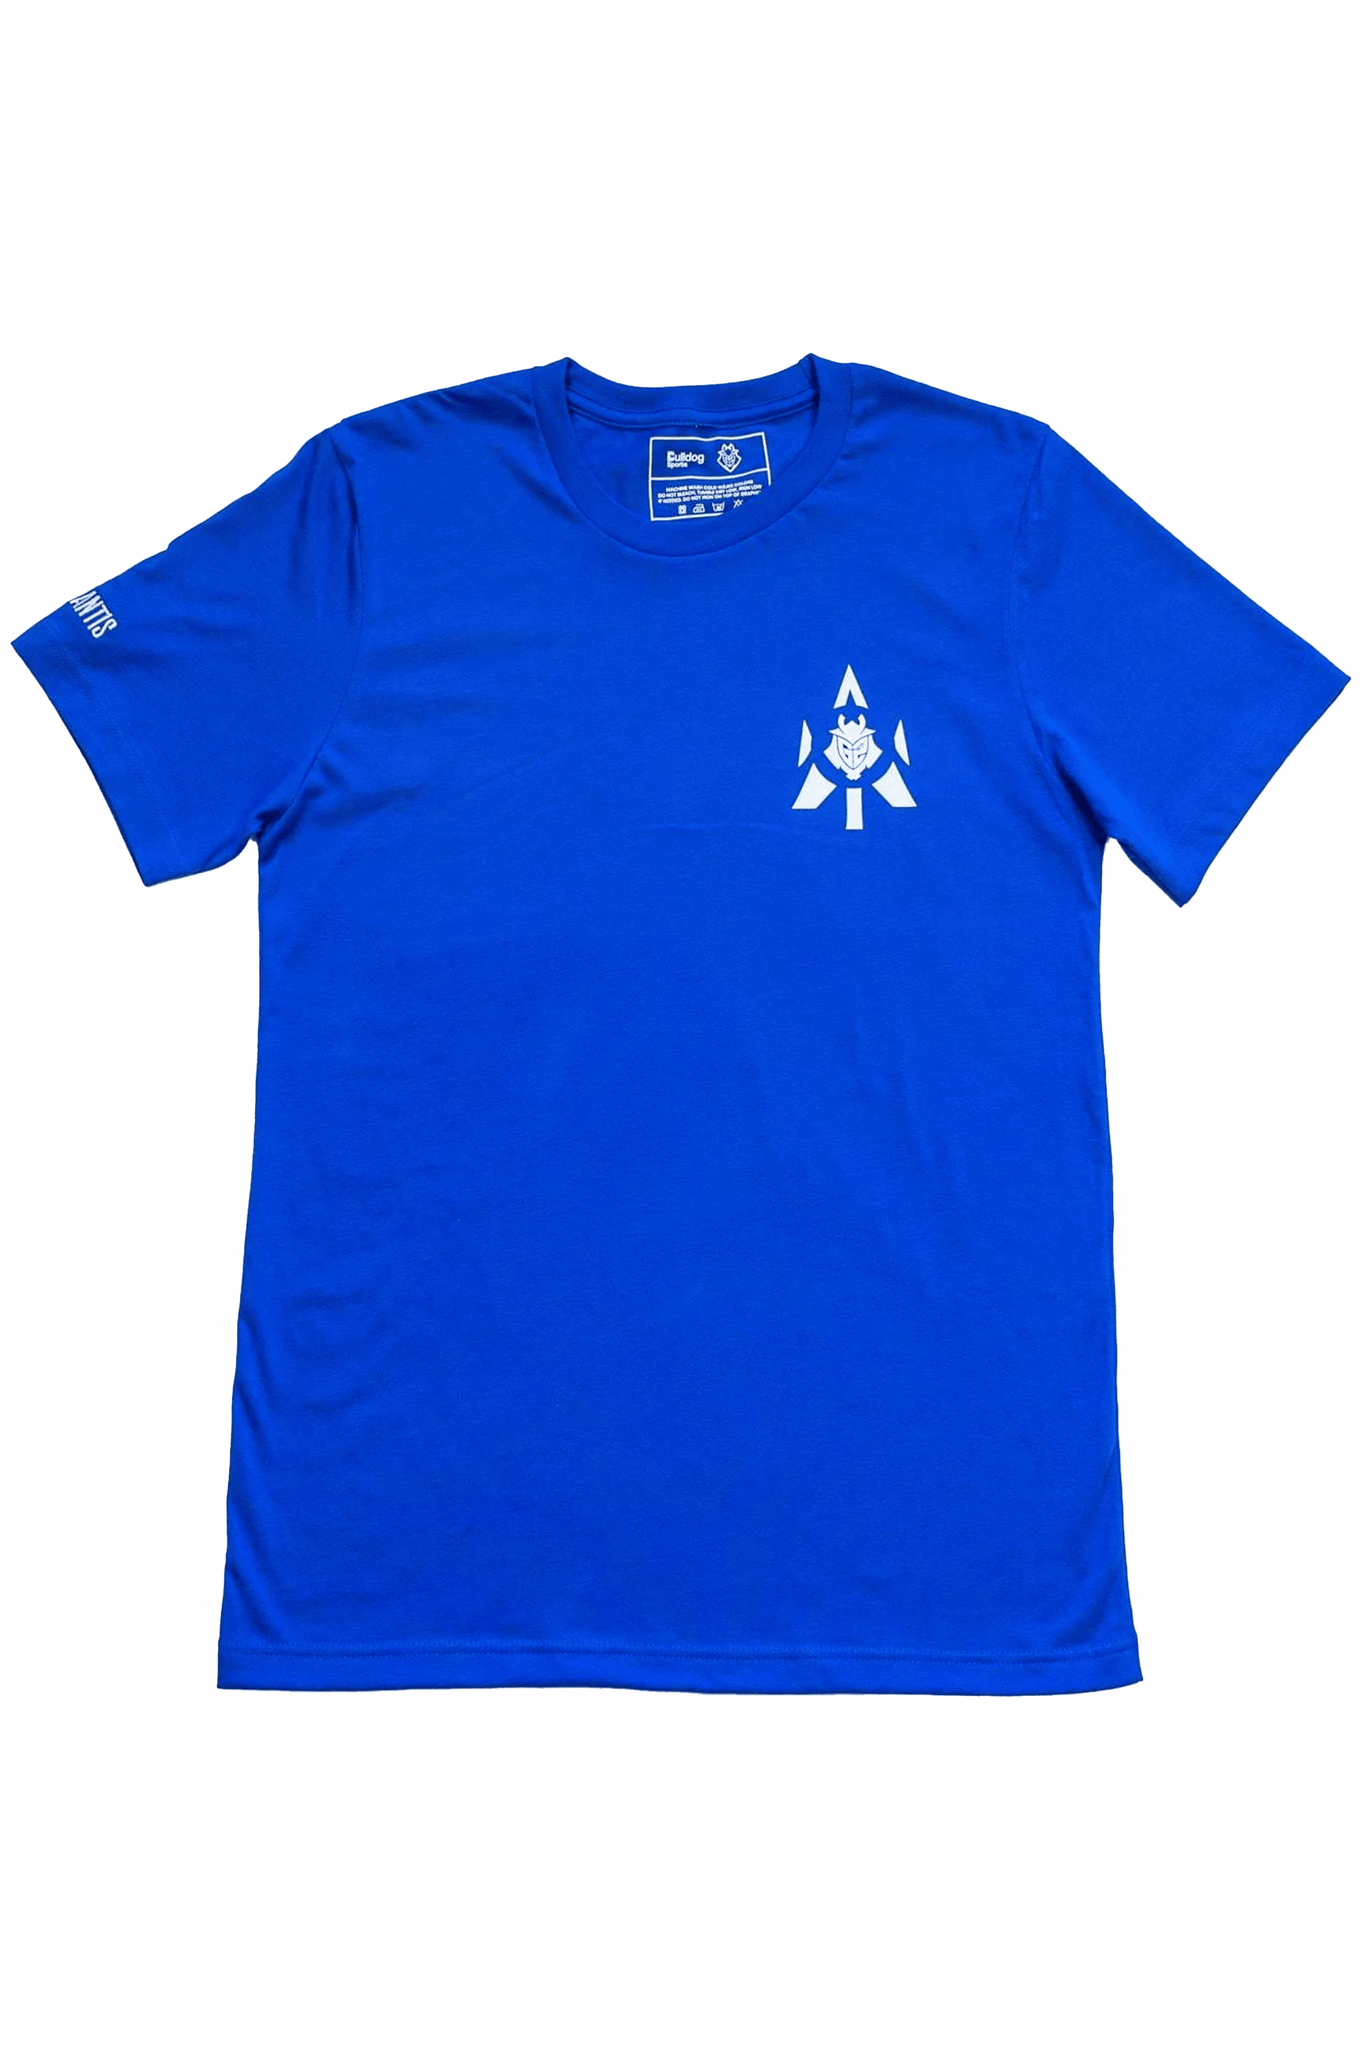 G2 Atlantis t-shirt, dive into style with this gaming tee. Show your allegiance to G2 Esports with aquatic flair